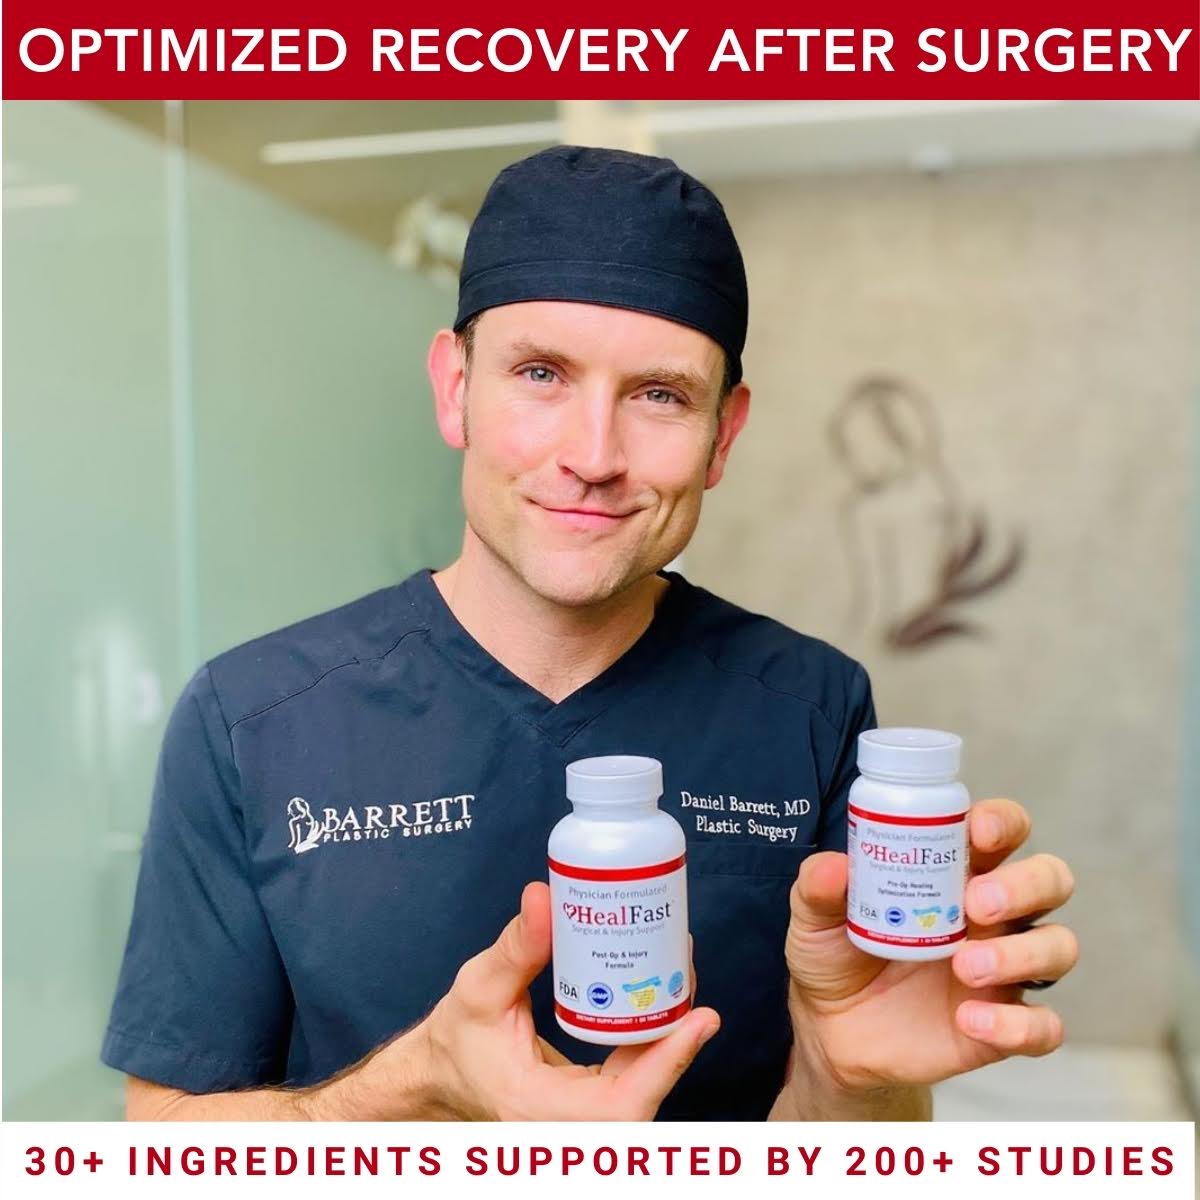 HealFast Nutrition for Post-Surgery & Injury Recovery WS